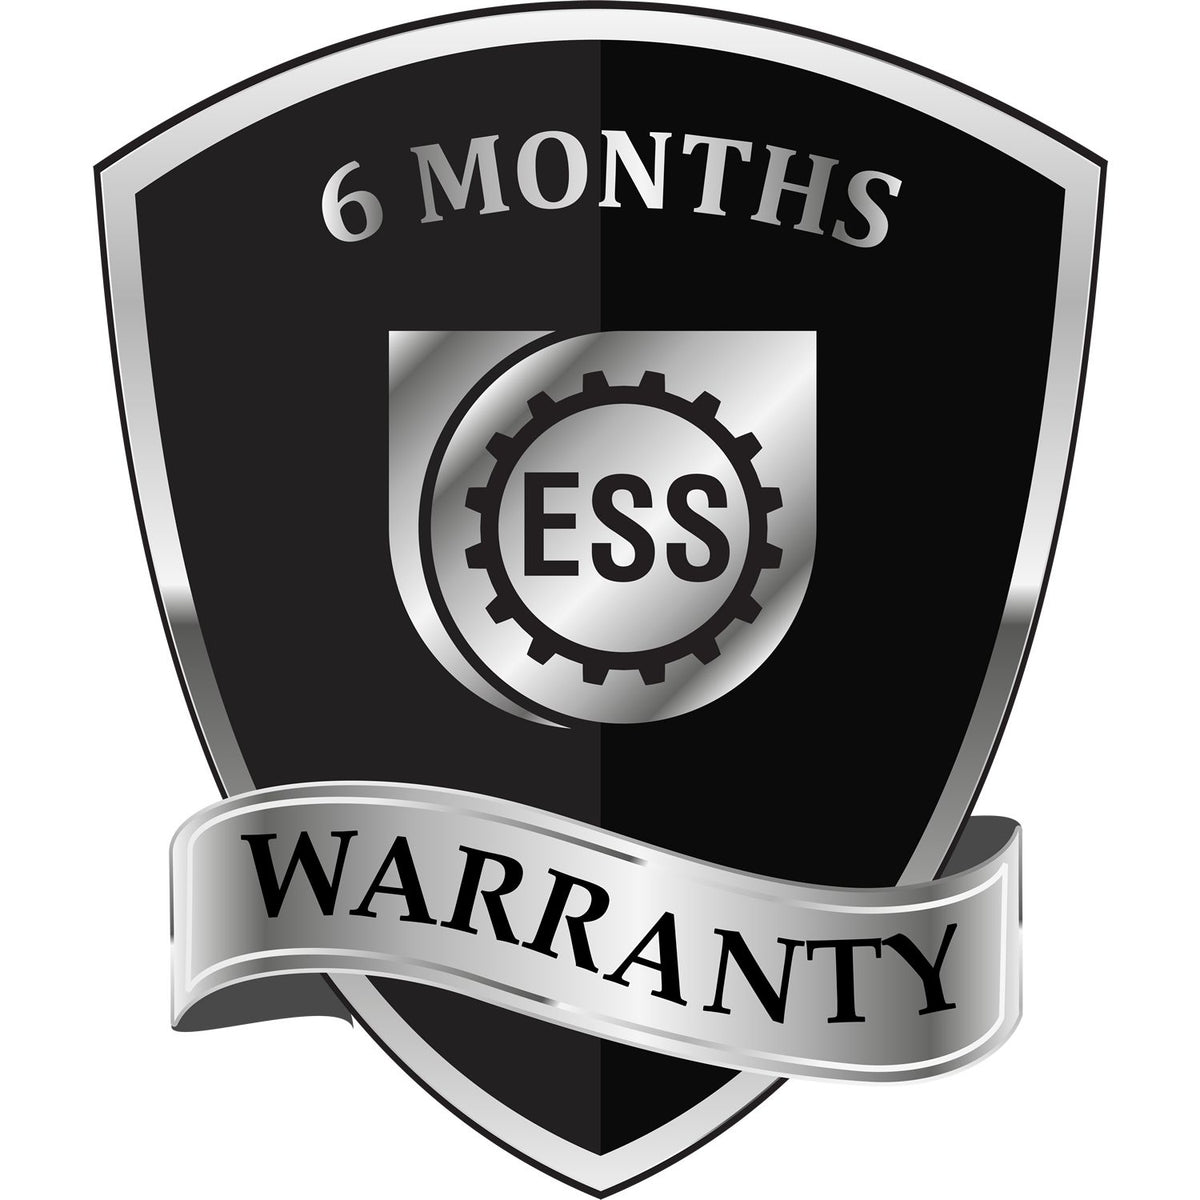 A black and silver badge or emblem showing warranty information for the Indiana Professional Geologist Seal Stamp